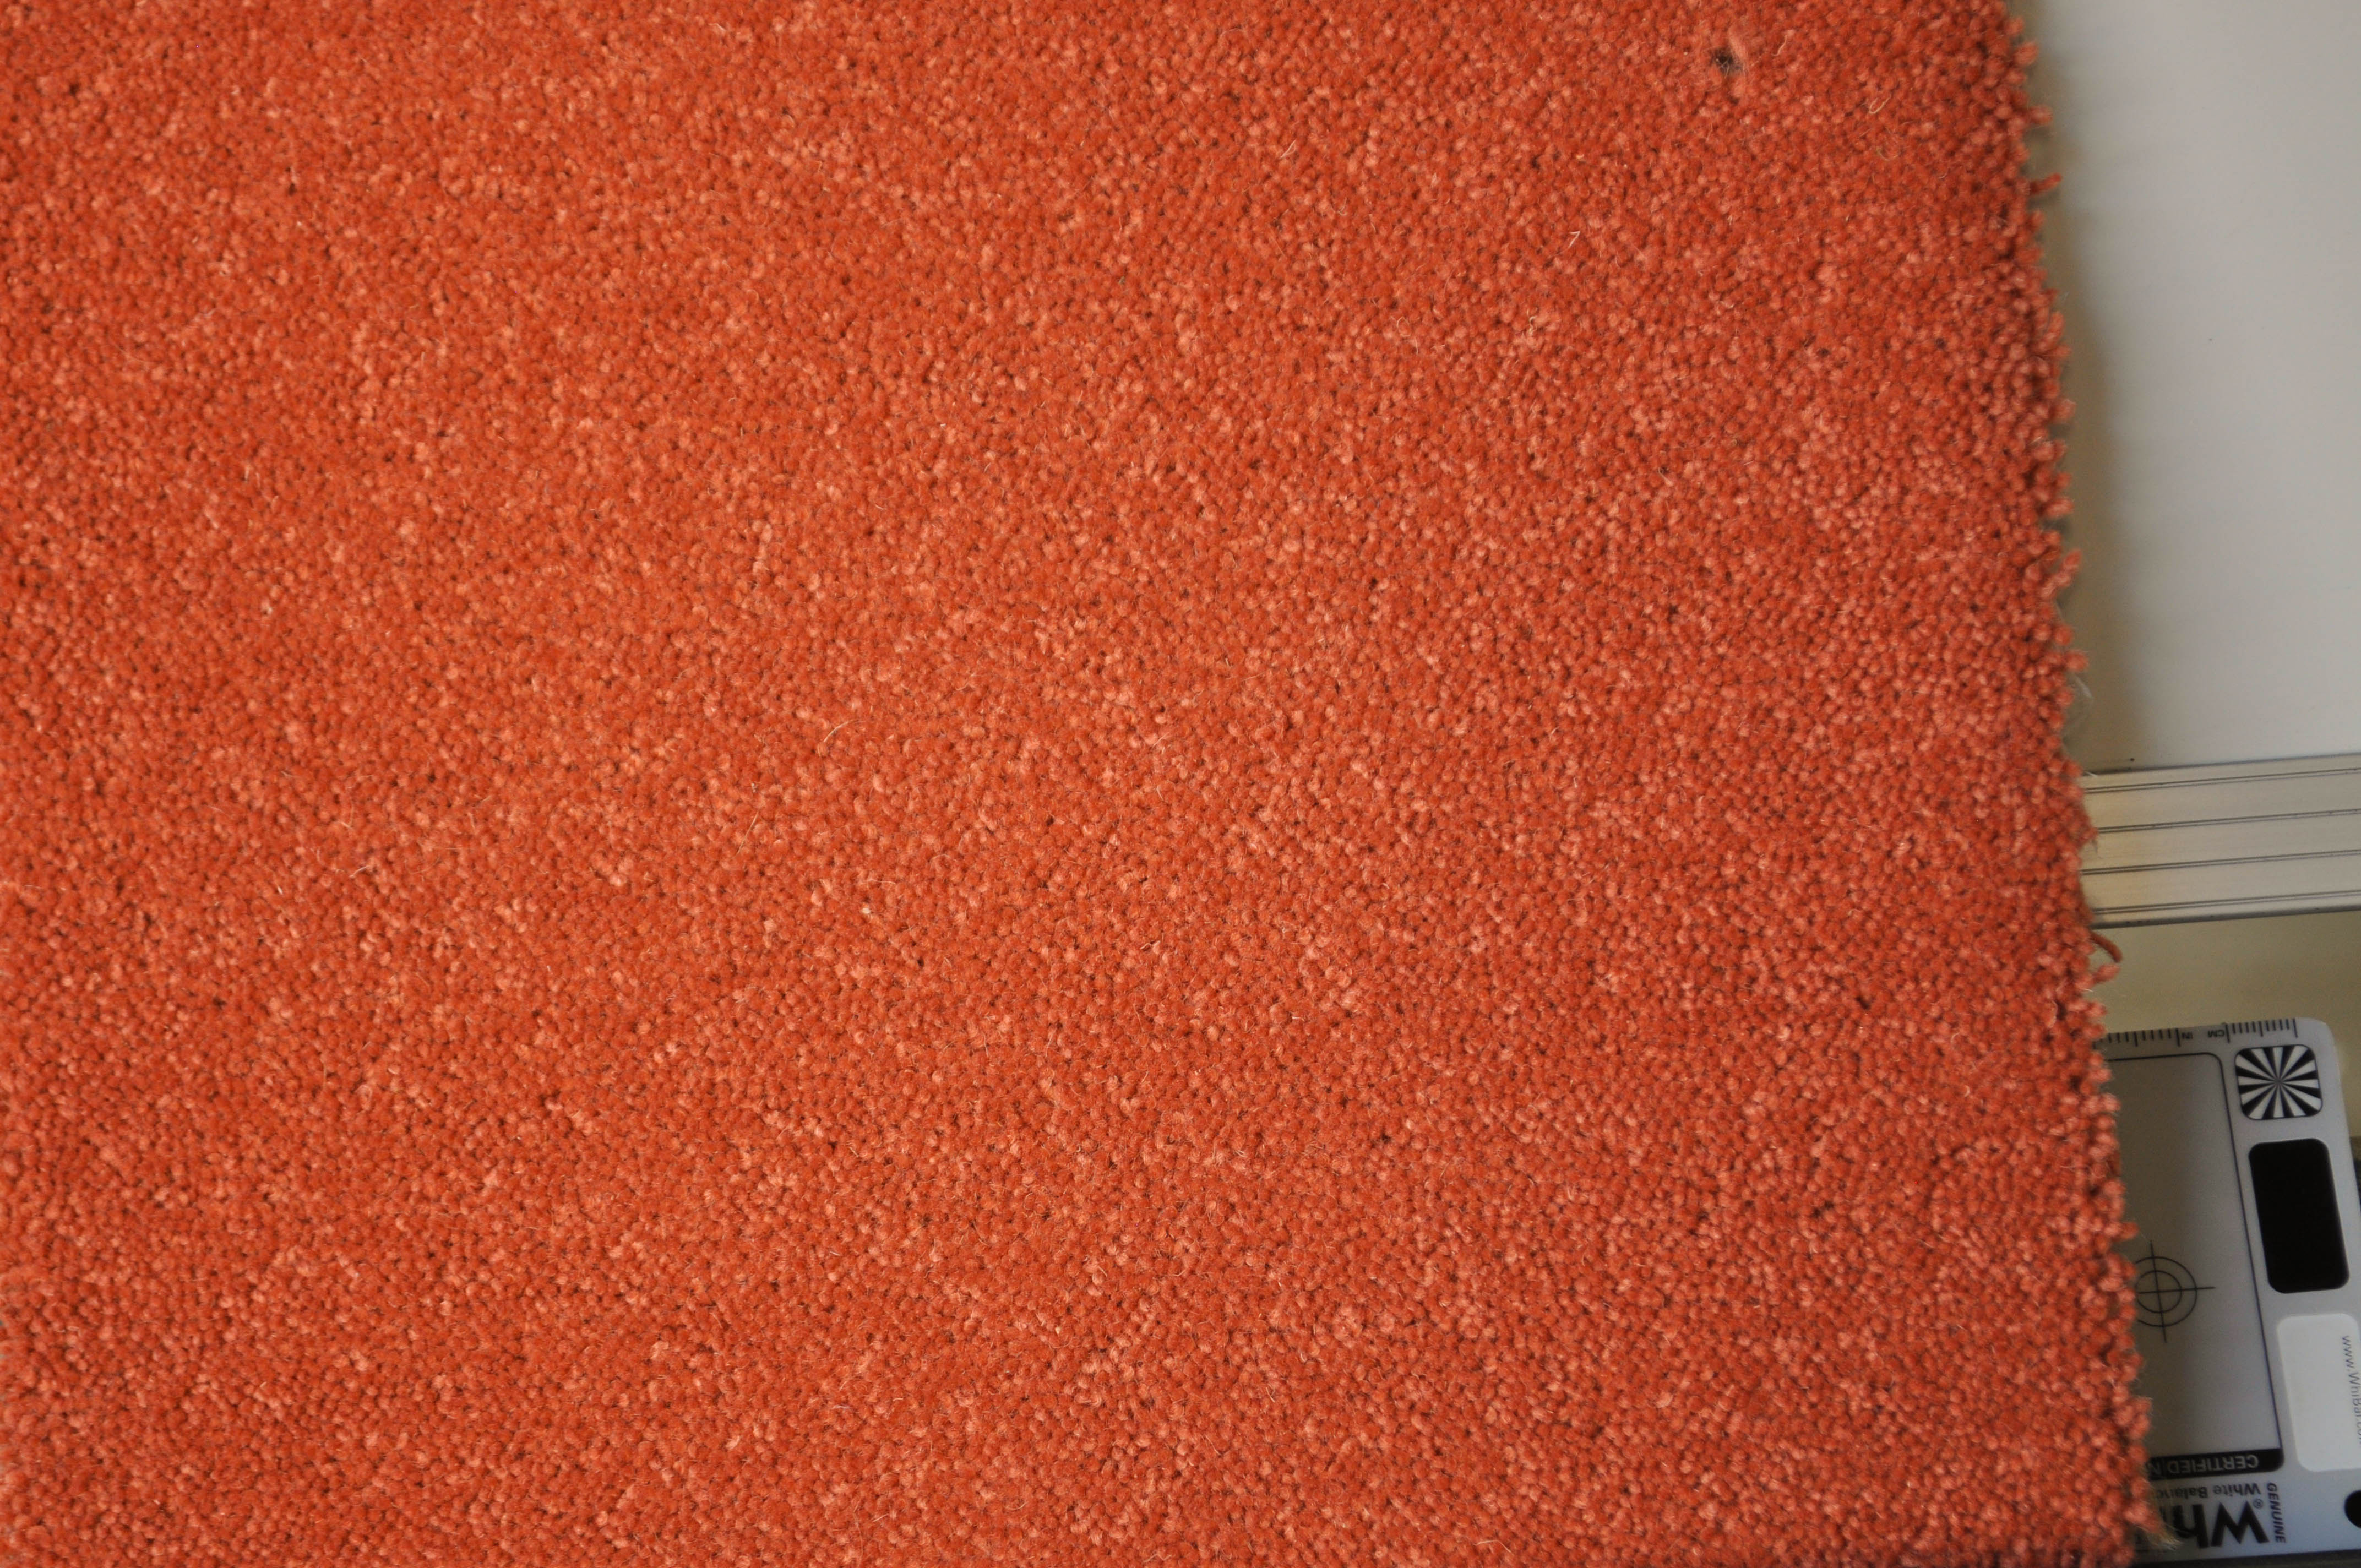 showing a sample of carpet, it being of a  orange color, twist pile, 80%wool-20 nylon yarn carpet on sale at Concord Floors.